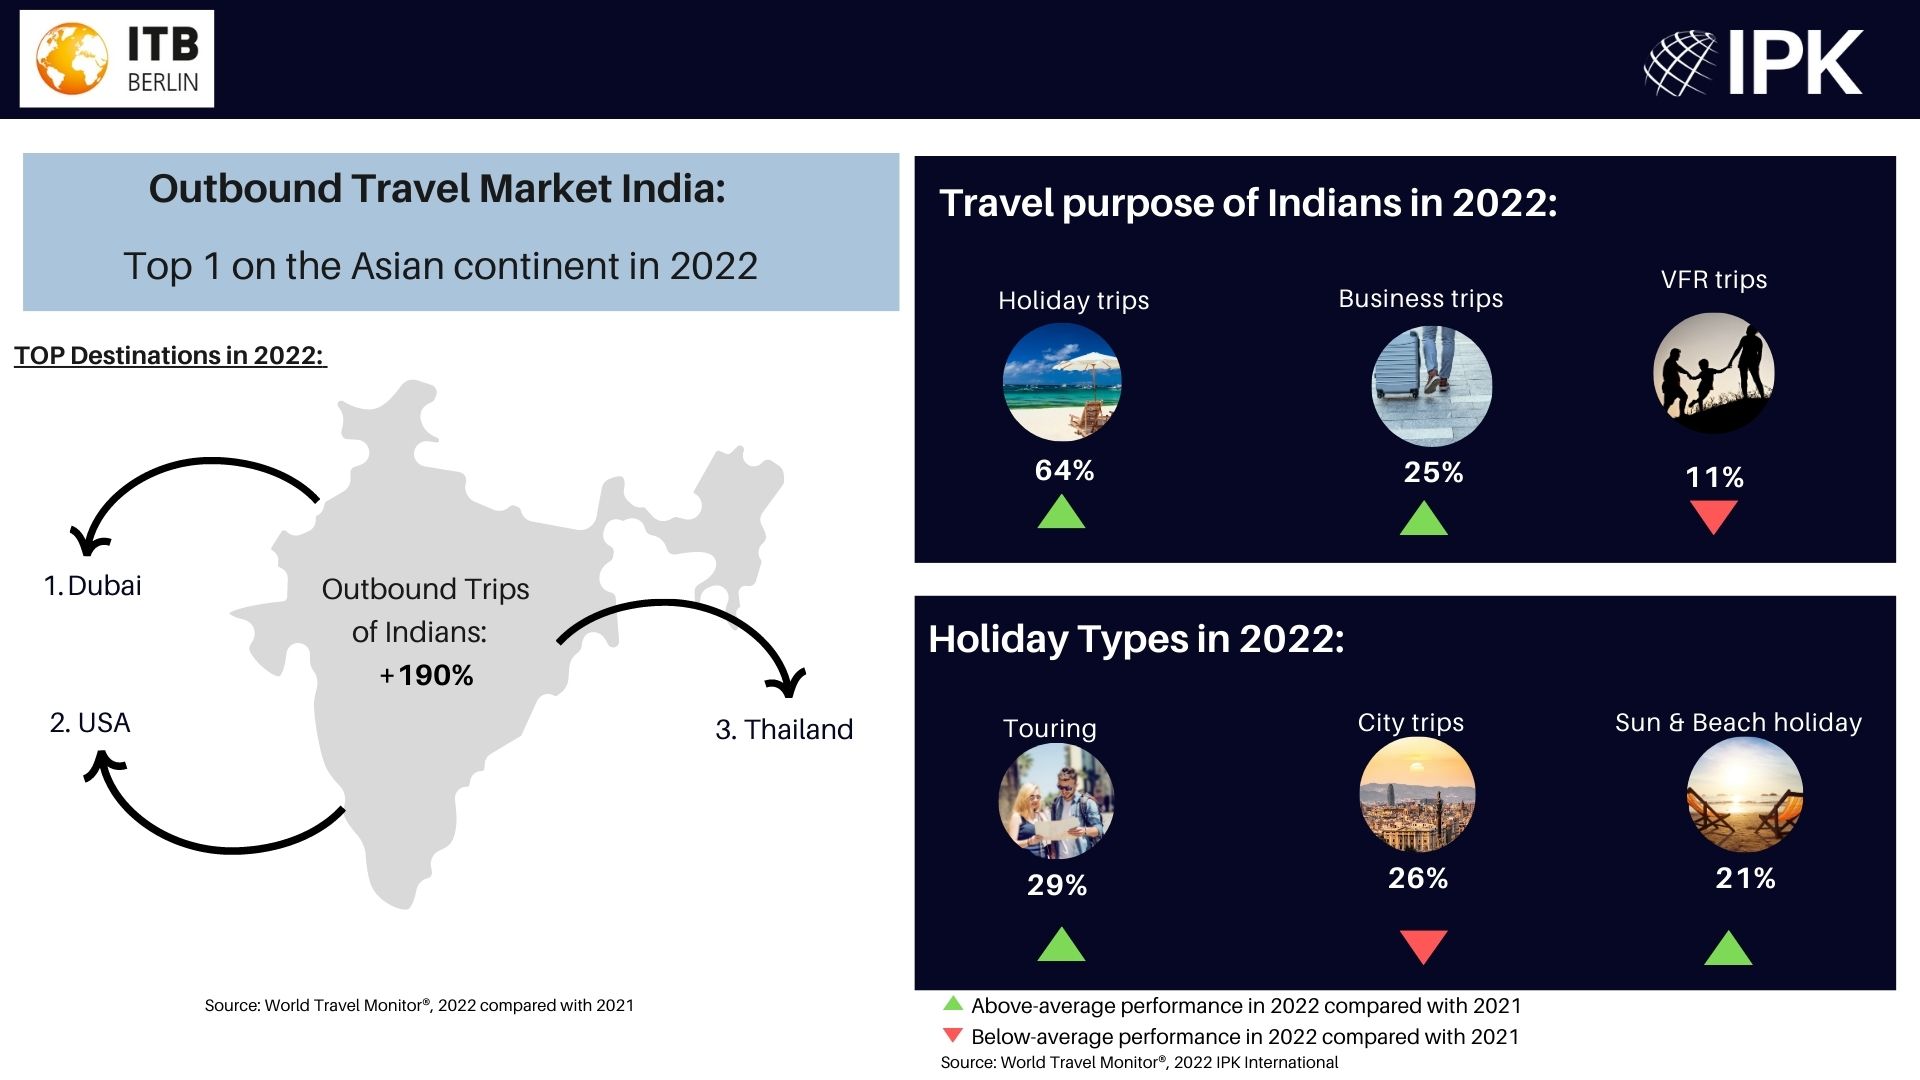 ITB Berlin and IPK International: India’s outbound travel market in 2022